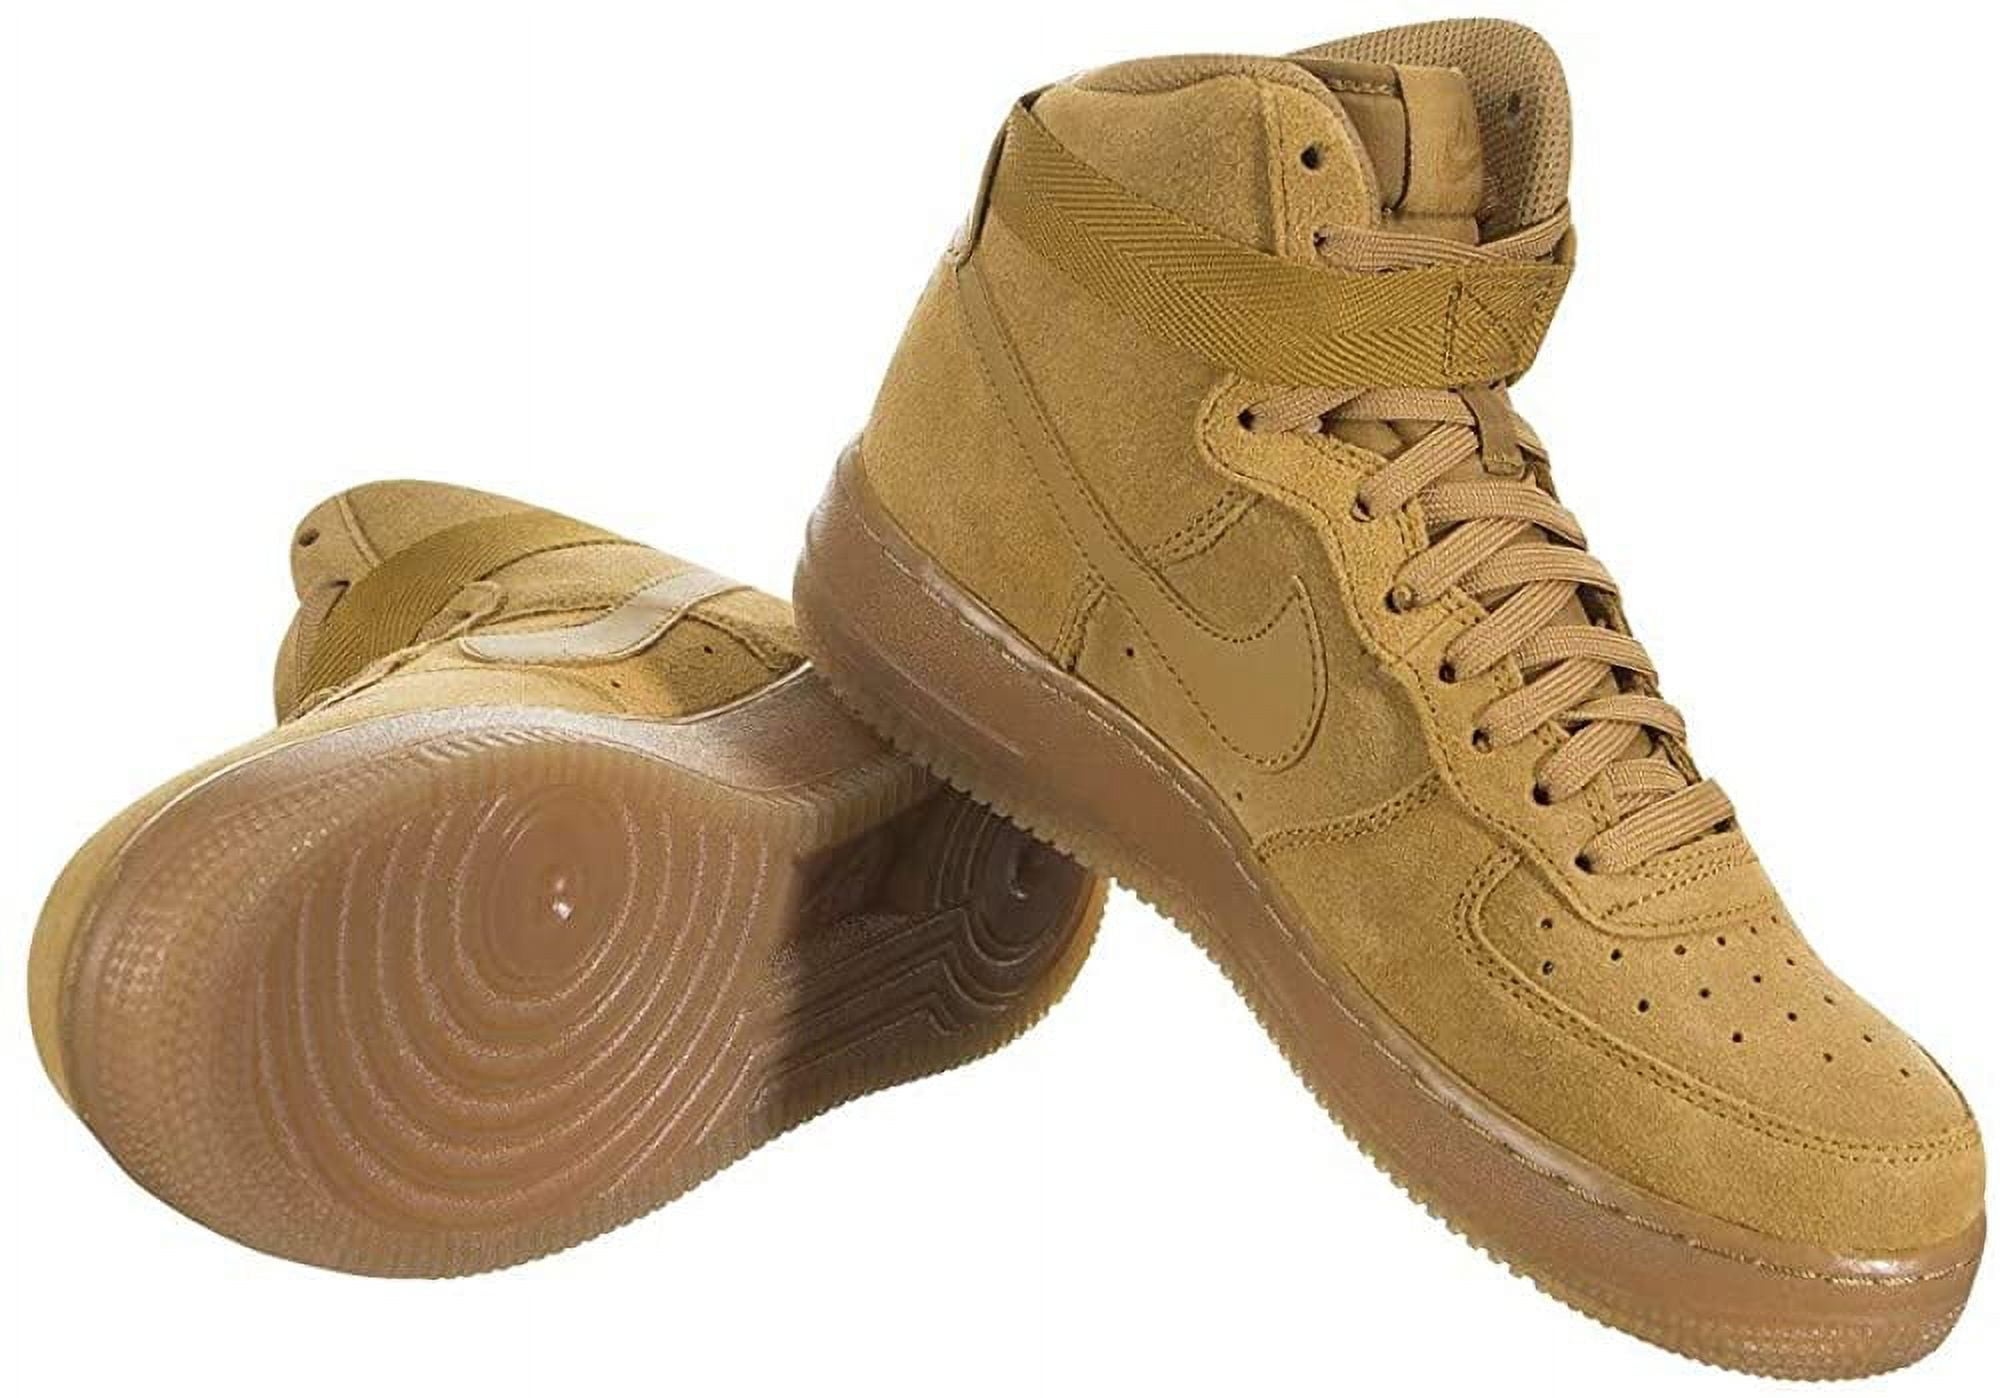 Nike Air Force 1 High LV8 Grade School Lifestyle Shoes Brown Wheat